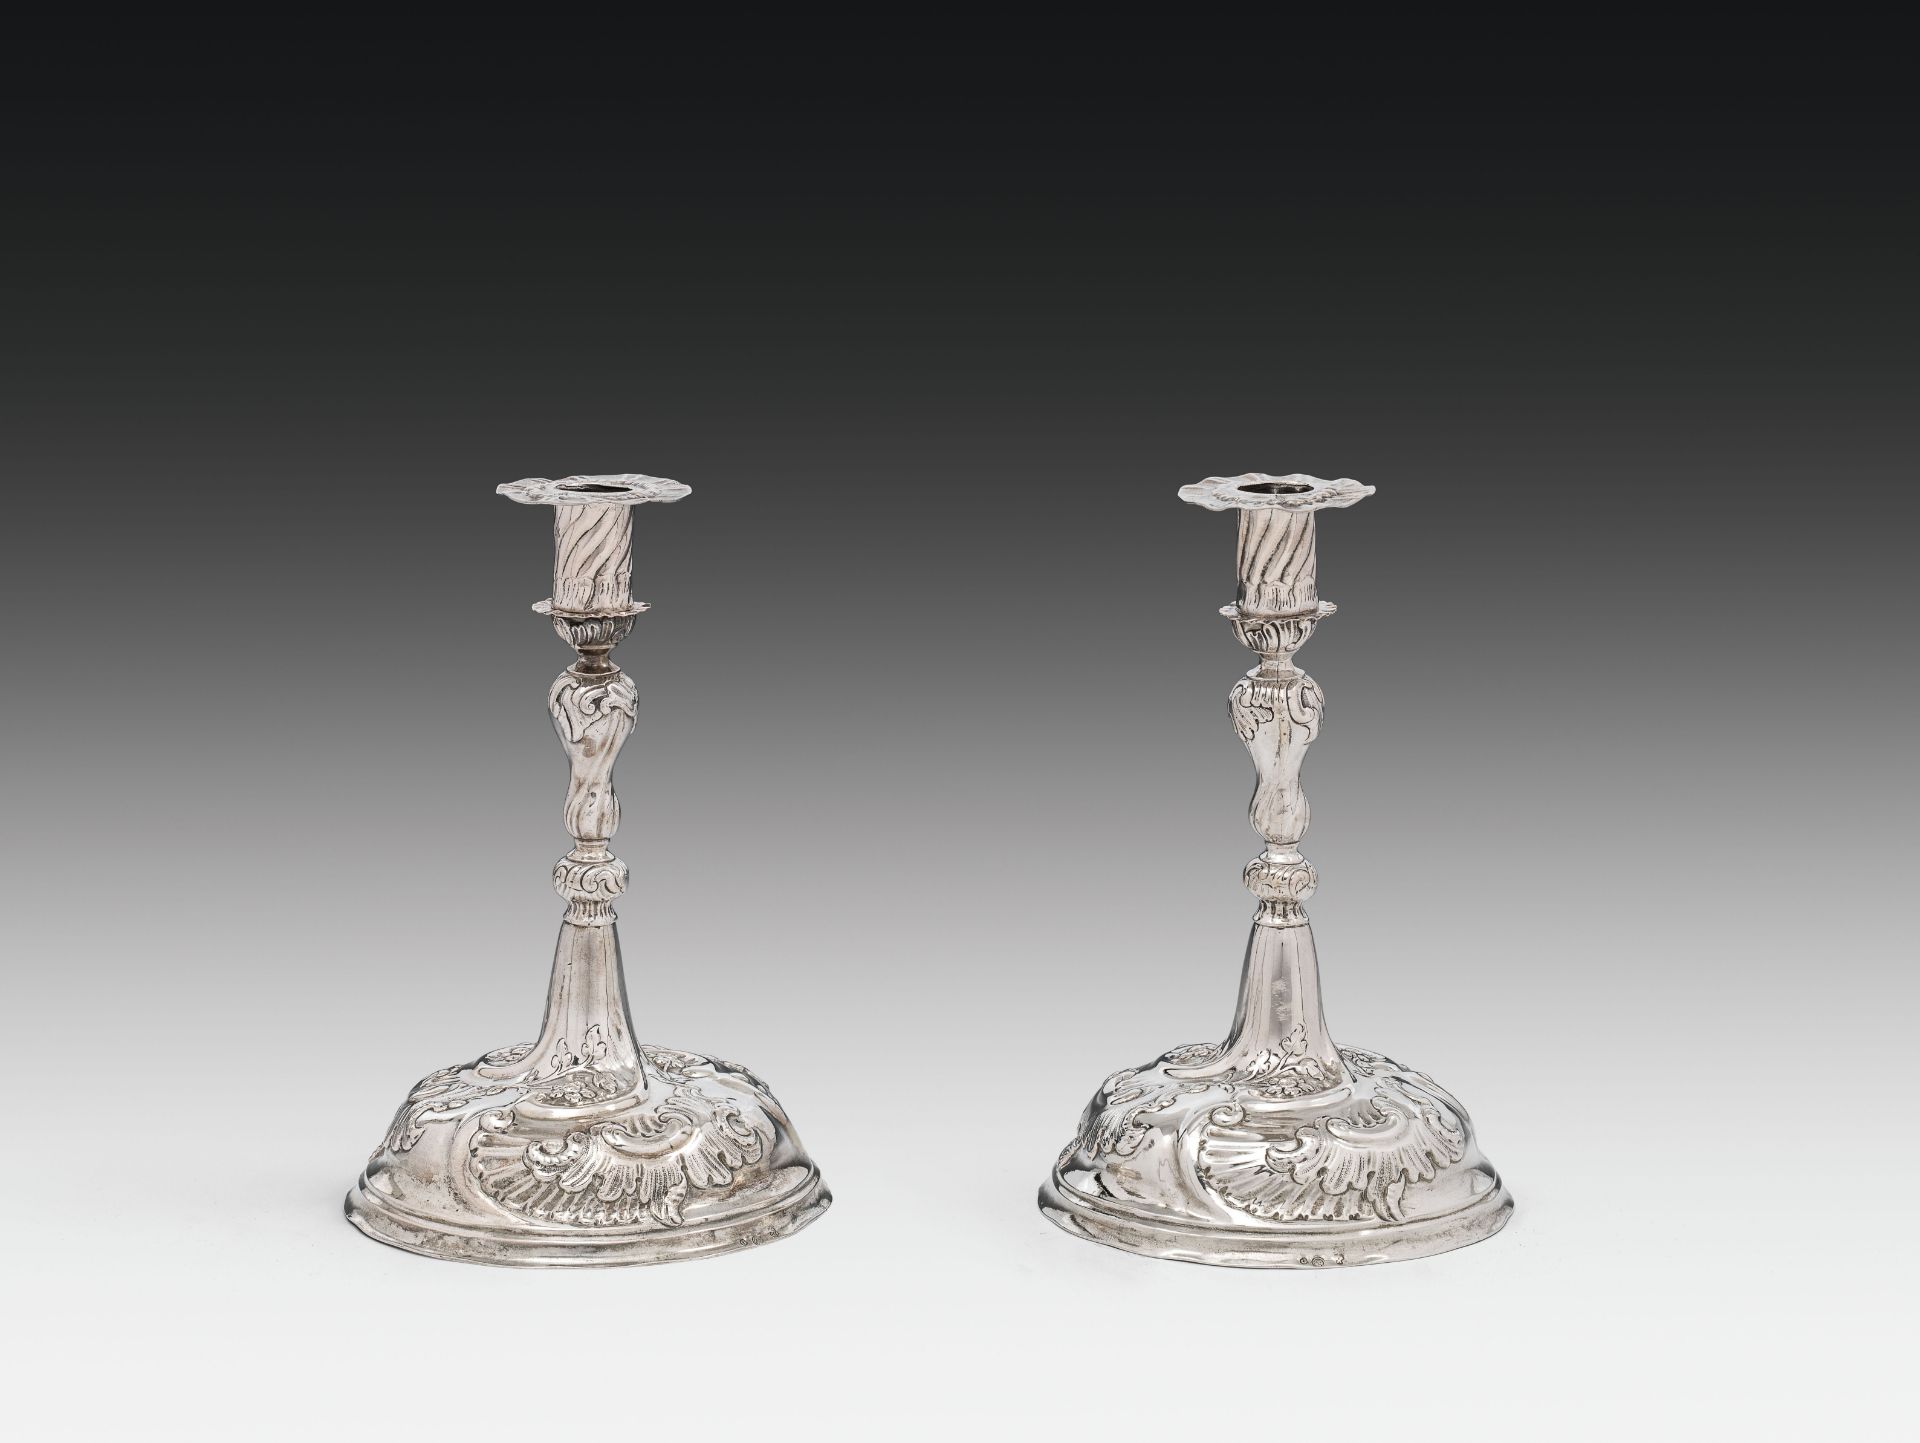 Pair of candlestickssilver; on the side marked: unclear hallmark, "G" and unclear maker's markh.